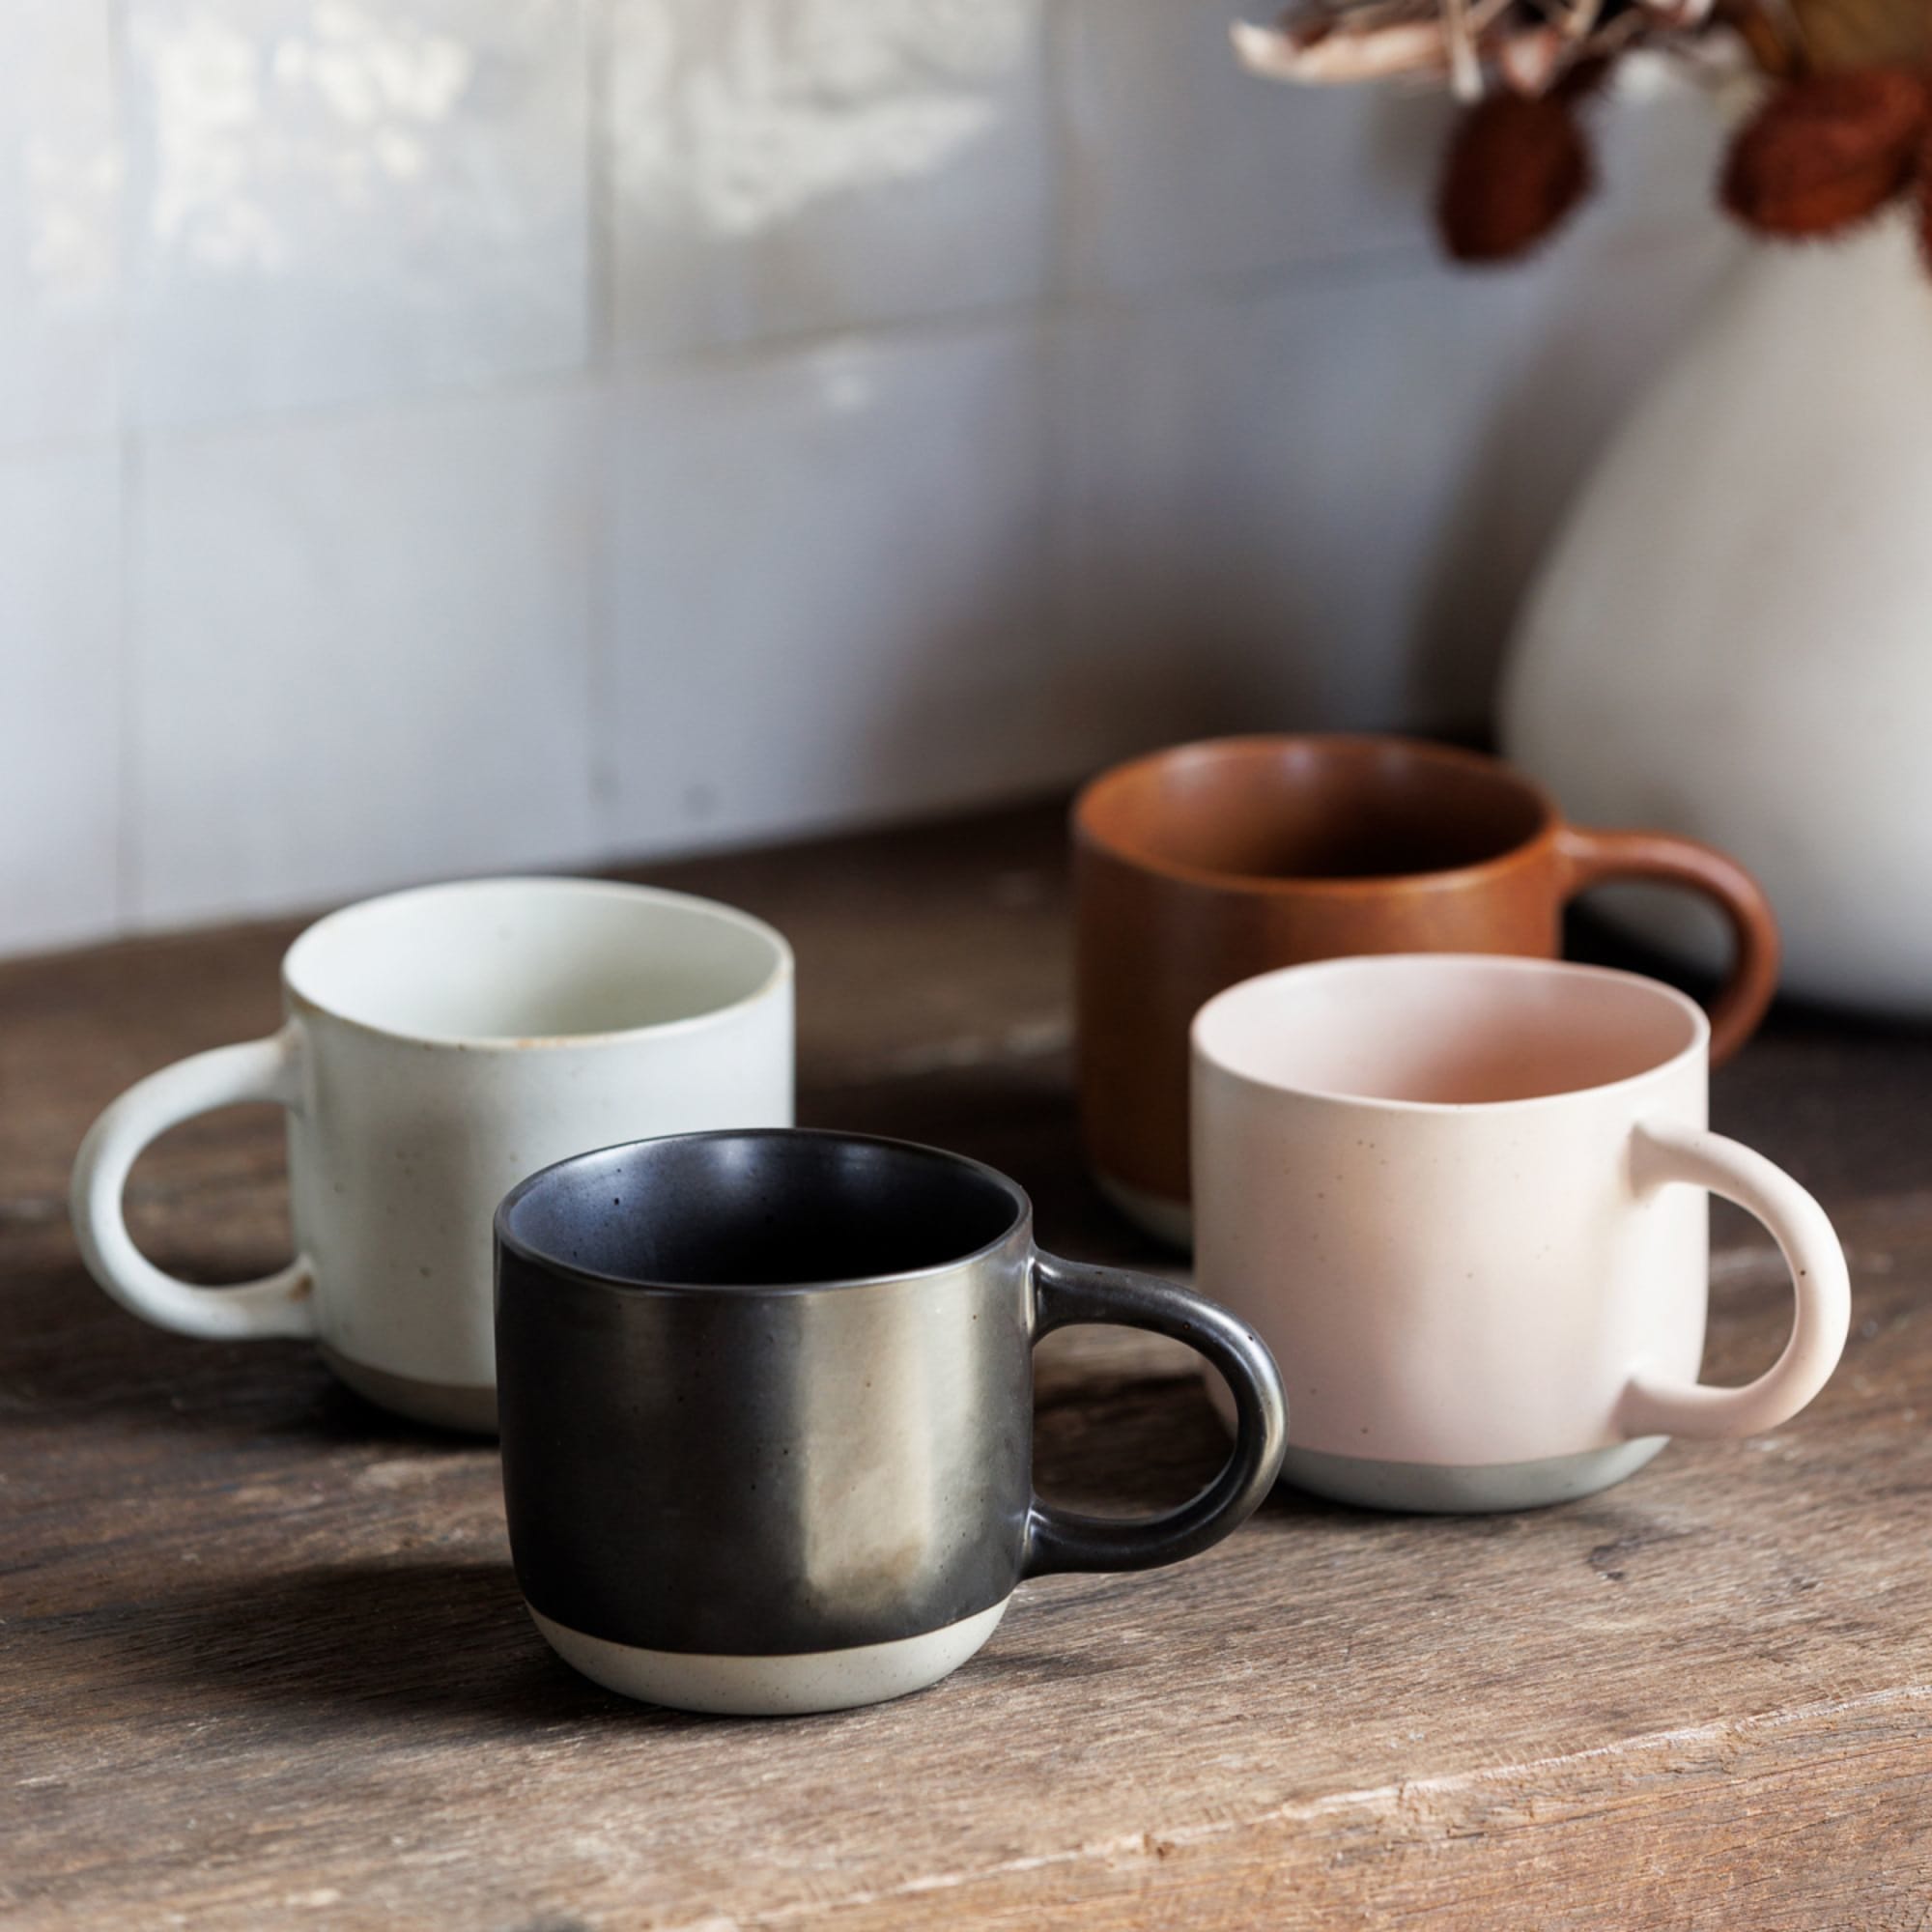 Gooditour Ceramic Coffee Mug Set - 16 Oz Large Coffee Mugs - Embossed  Stoneware Cups with Handle for Latte Tea Cappuccino Cocoa - Microwave  Dishwasher